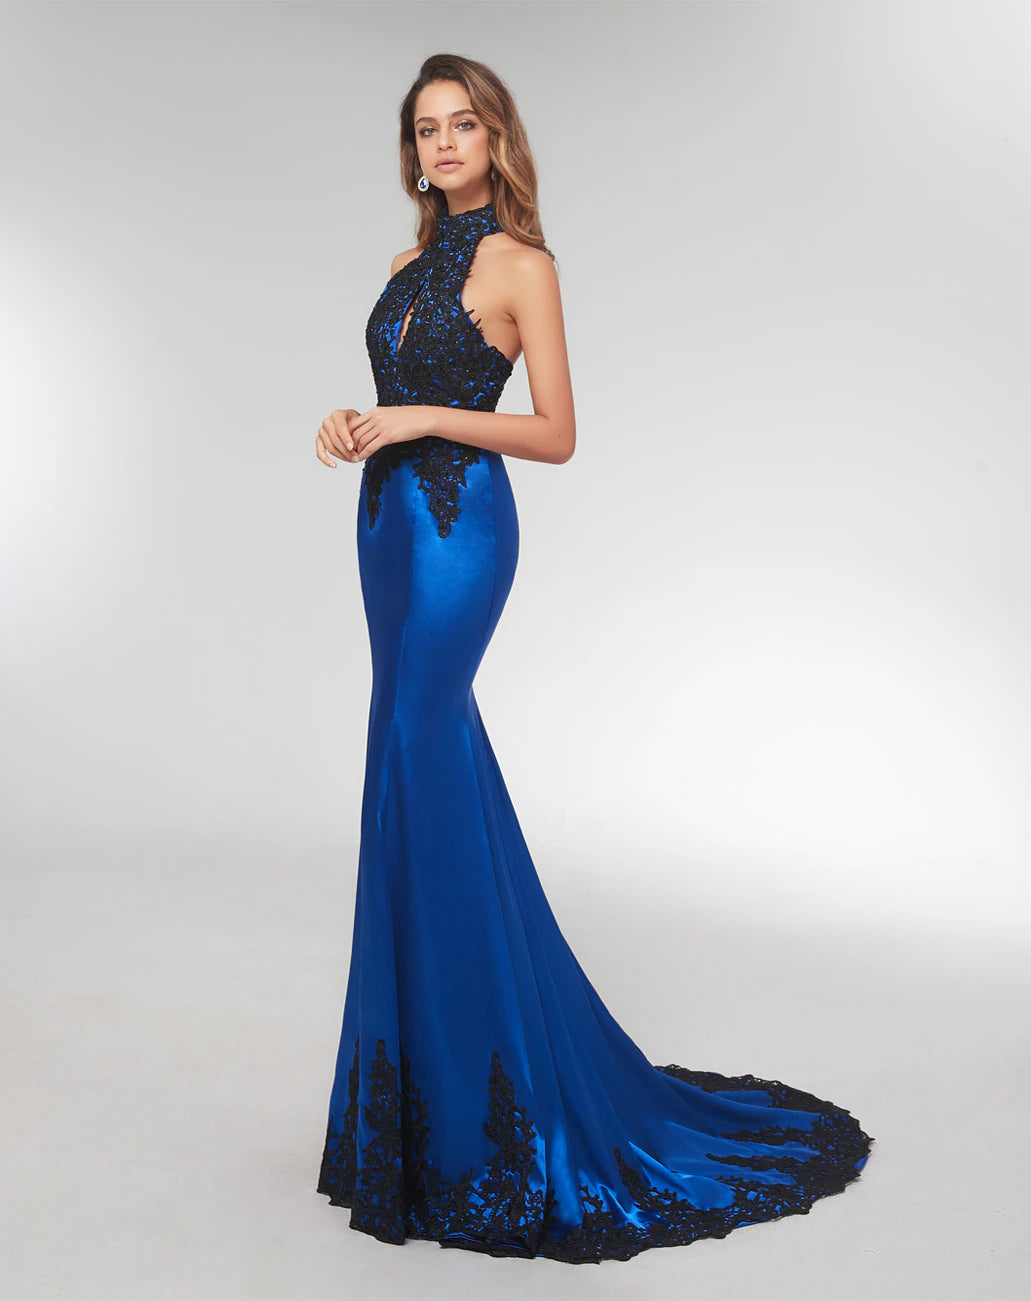 Mikka Backless Halter Mermaid Floor-Length Evening Gown (Made-To-Order) - ENE TRENDS -custom designed-personalized- tailored-suits-near me-shirt-clothes-dress-amazon-top-luxury-fashion-men-women-kids-streetwear-IG-best